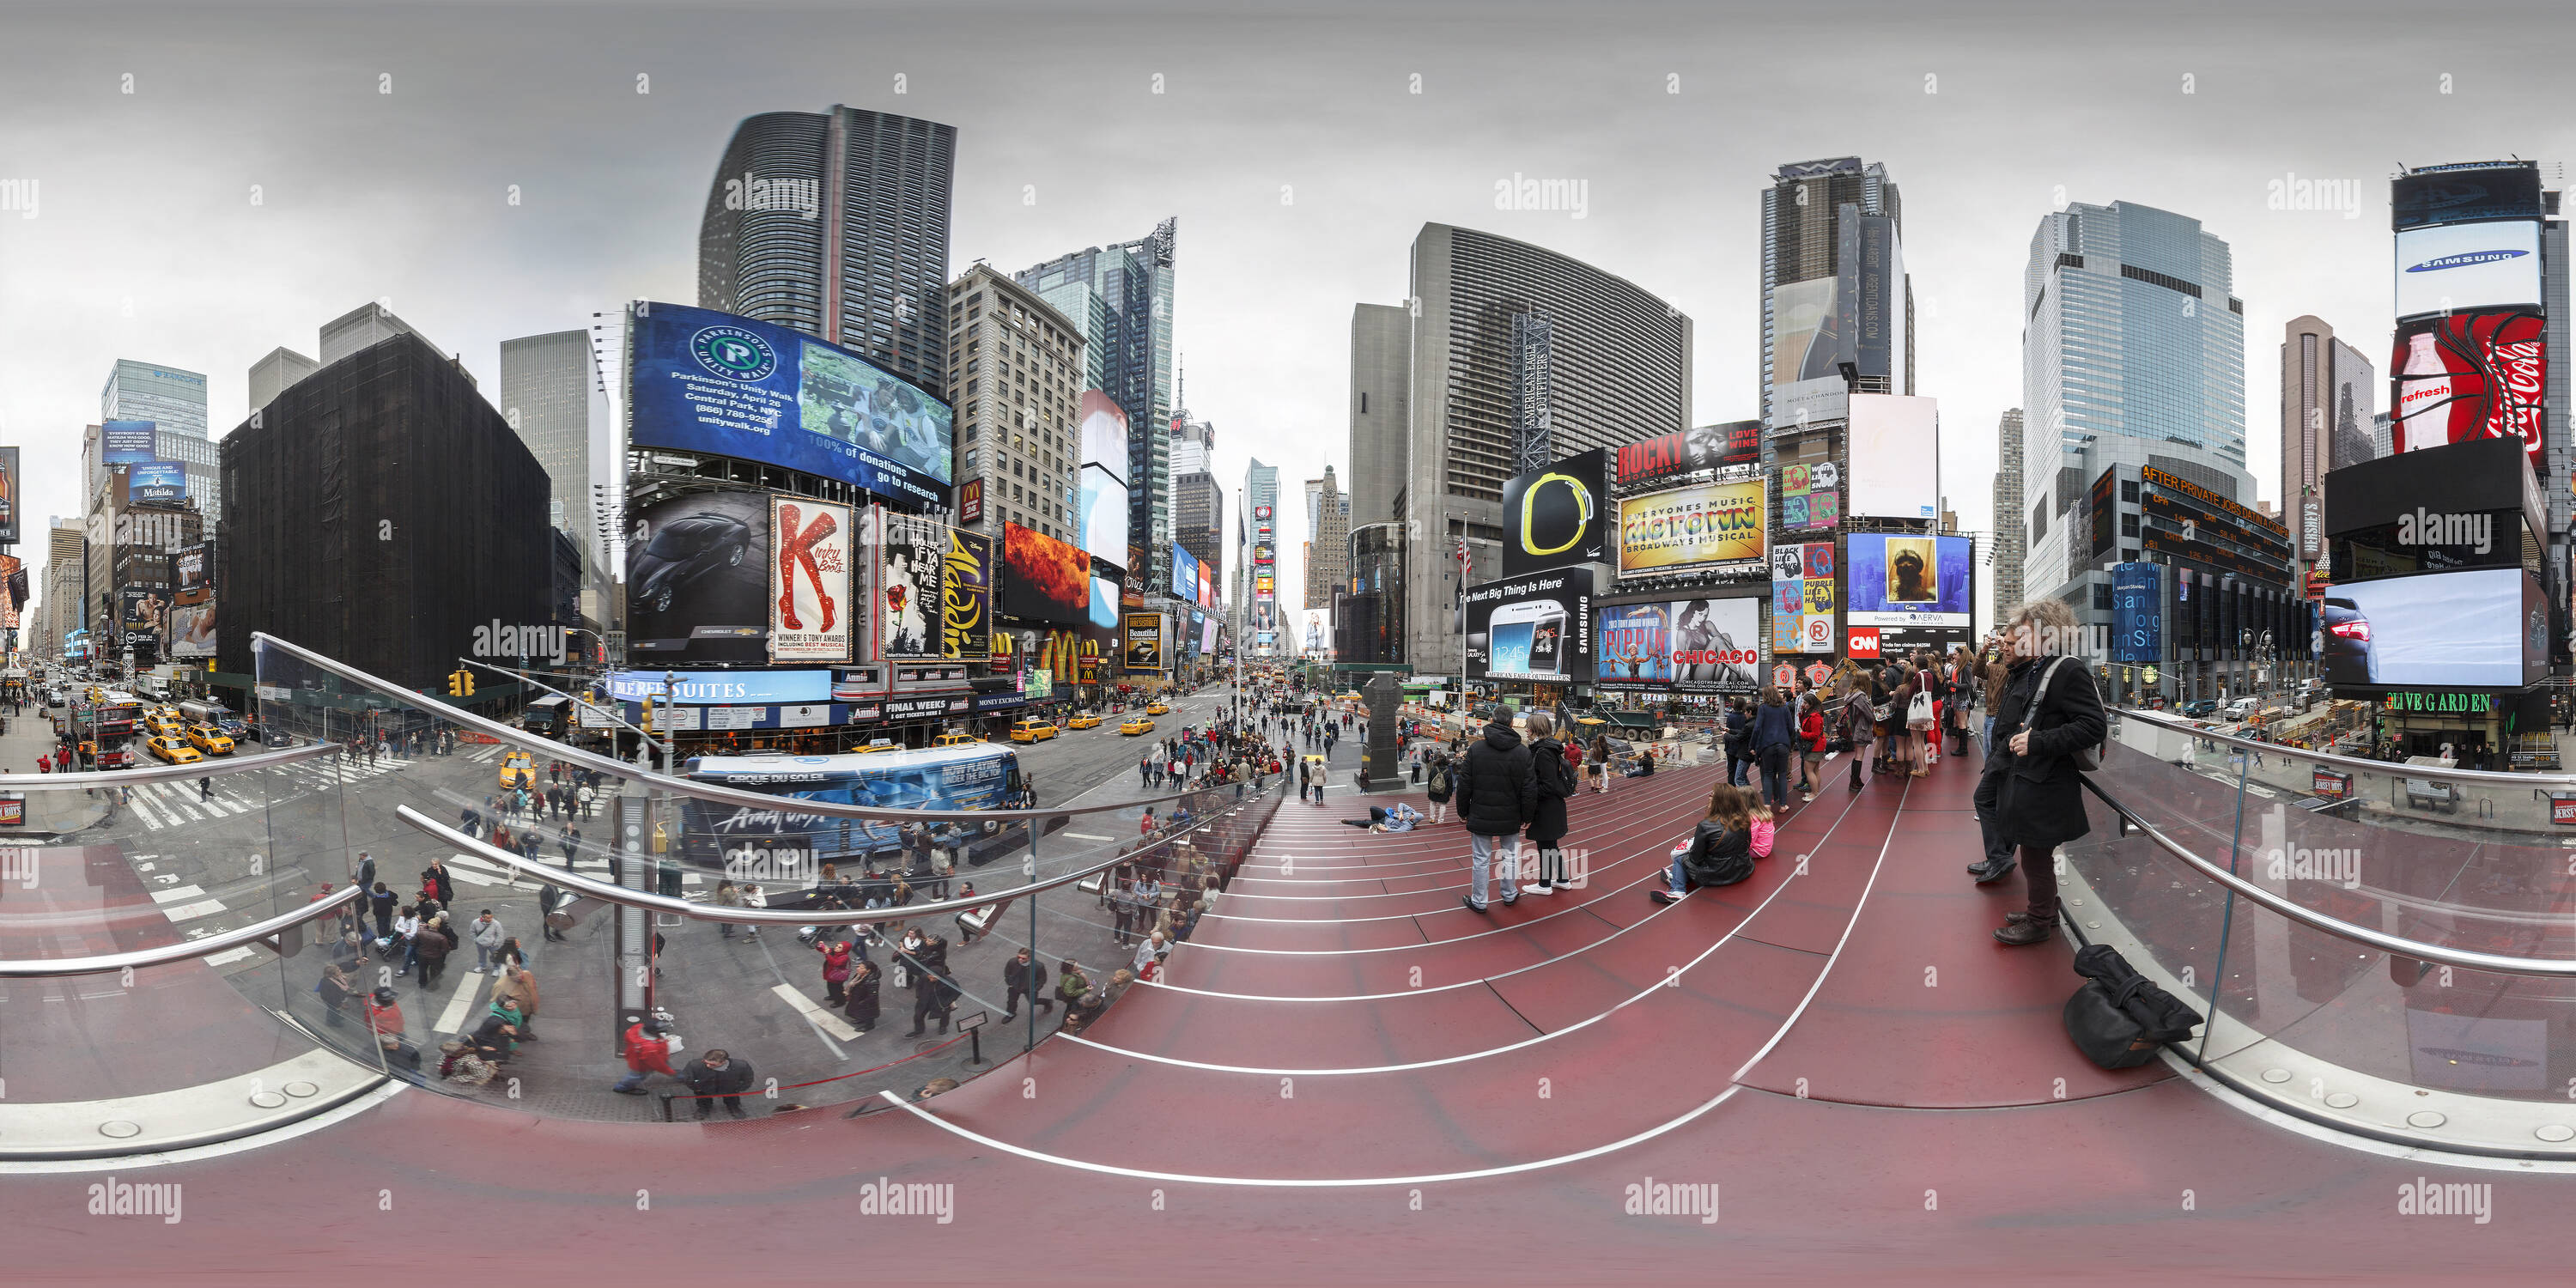 360-view-of-times-square-new-york-alamy